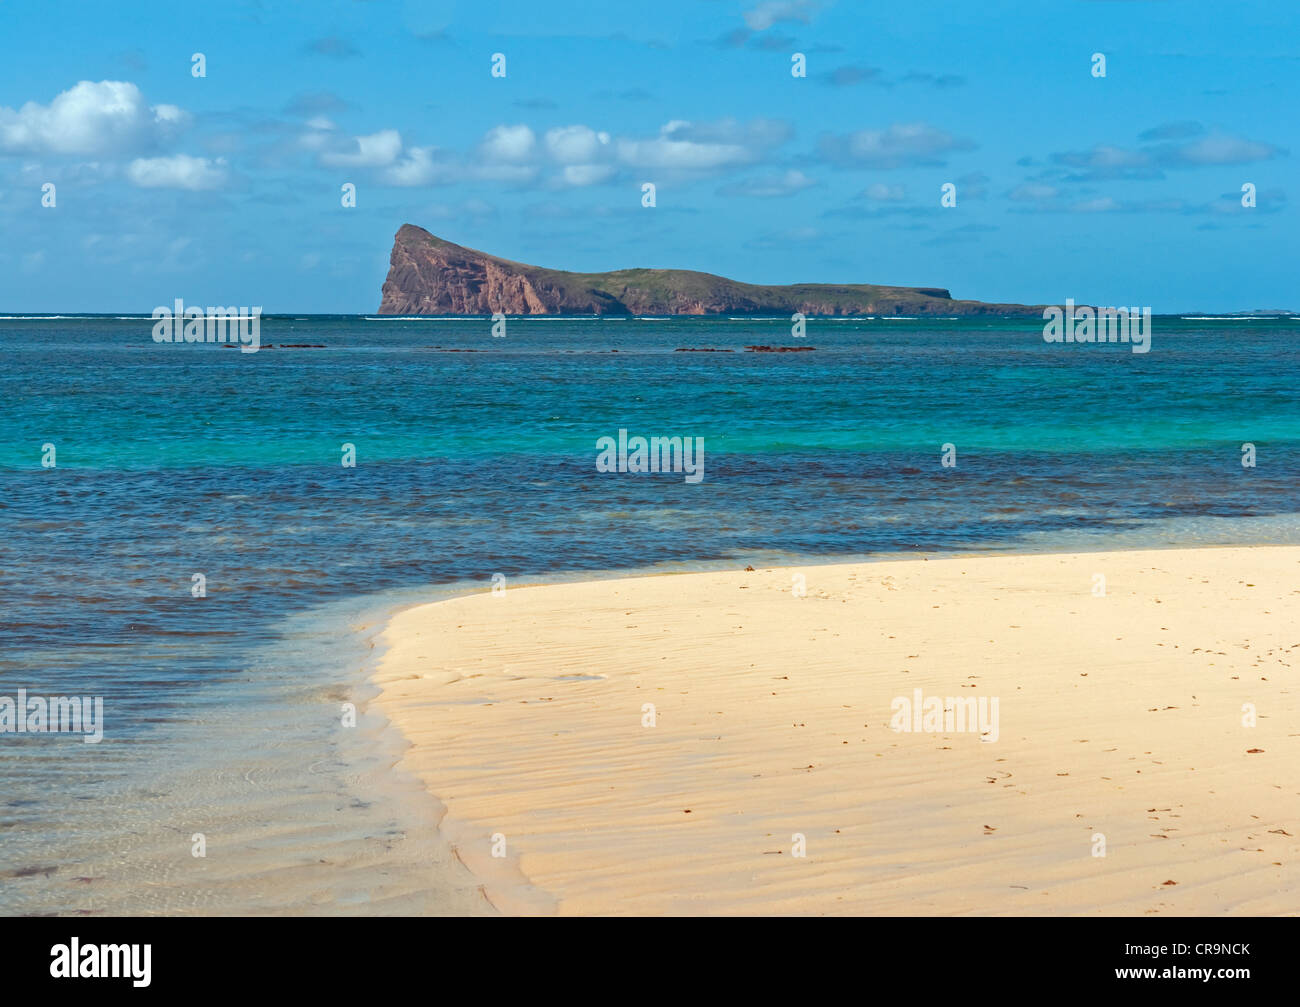 The island of Coin de Mire, off Cap Malheureux on the north coast of the Indian Ocean island of Mauritius Stock Photo